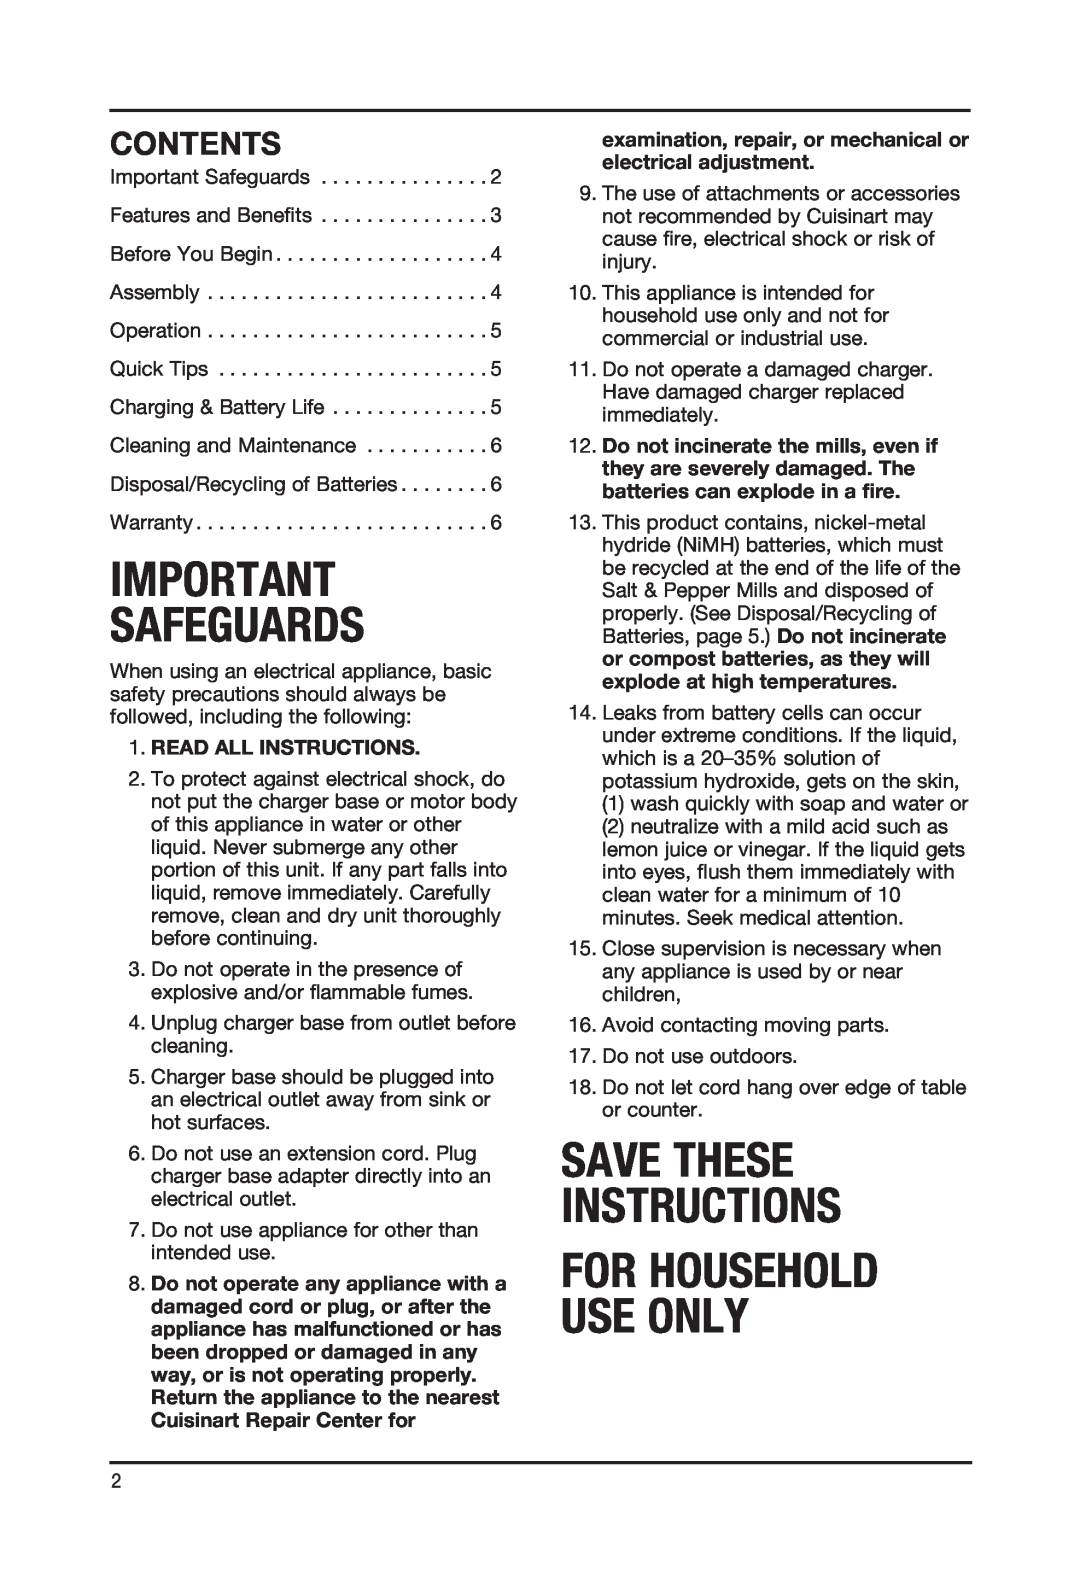 Cuisinart SP-2 Contents, Safeguards, Save These Instructions For Household Use Only, examination, repair, or mechanical or 